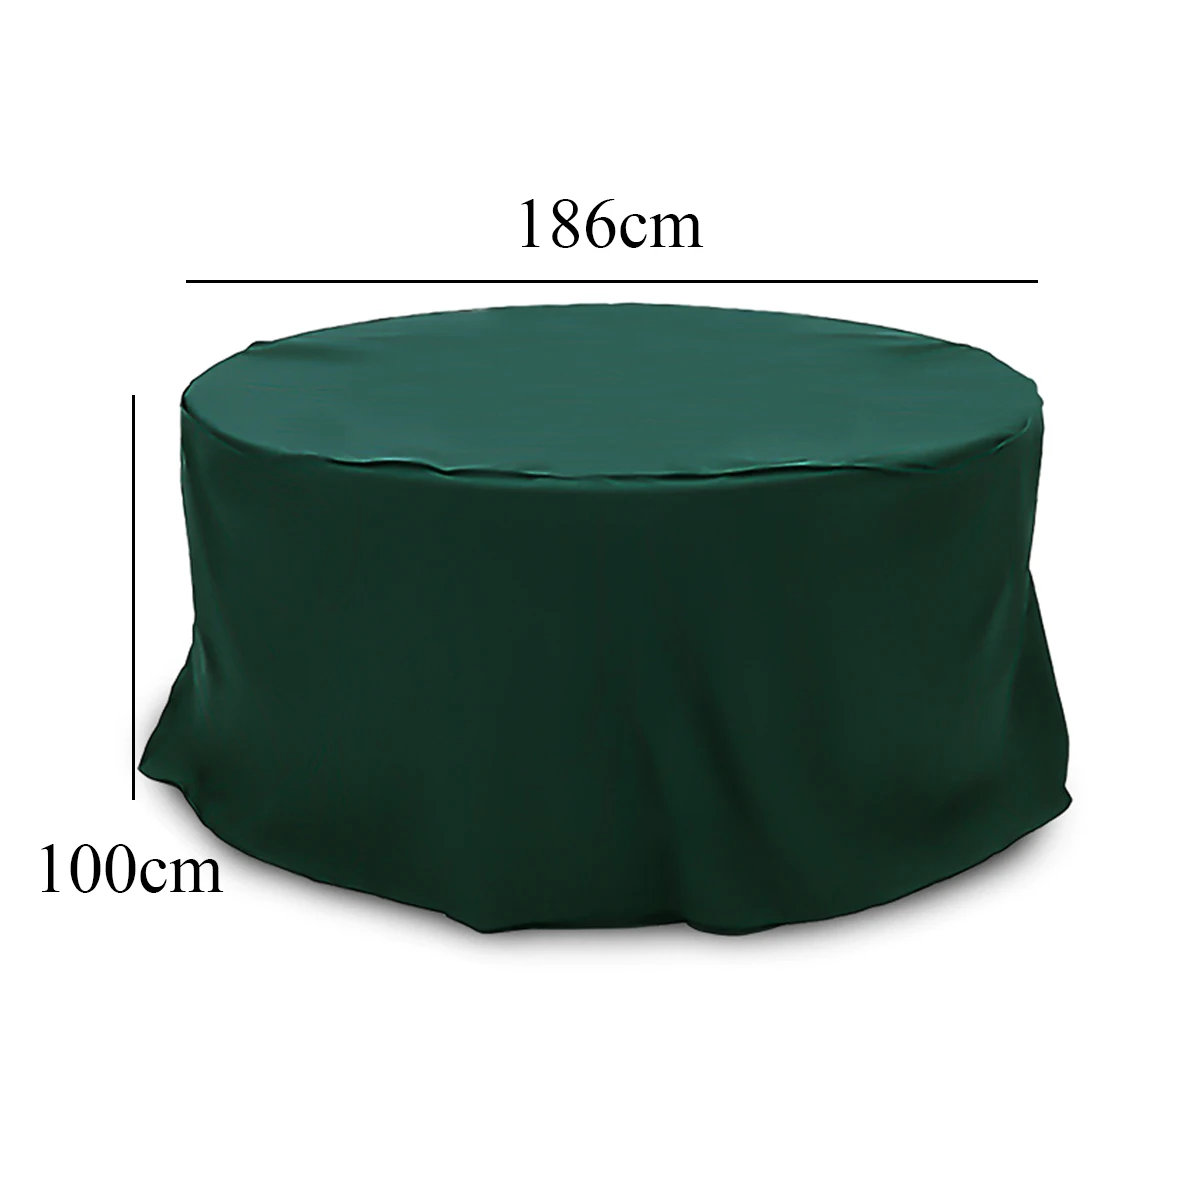 

Green Waterproof 95x140cm / 100x186cm Dust Cover Garden Patio Furniture Cover Set Outdoor Rattan Table Protection Round Cube